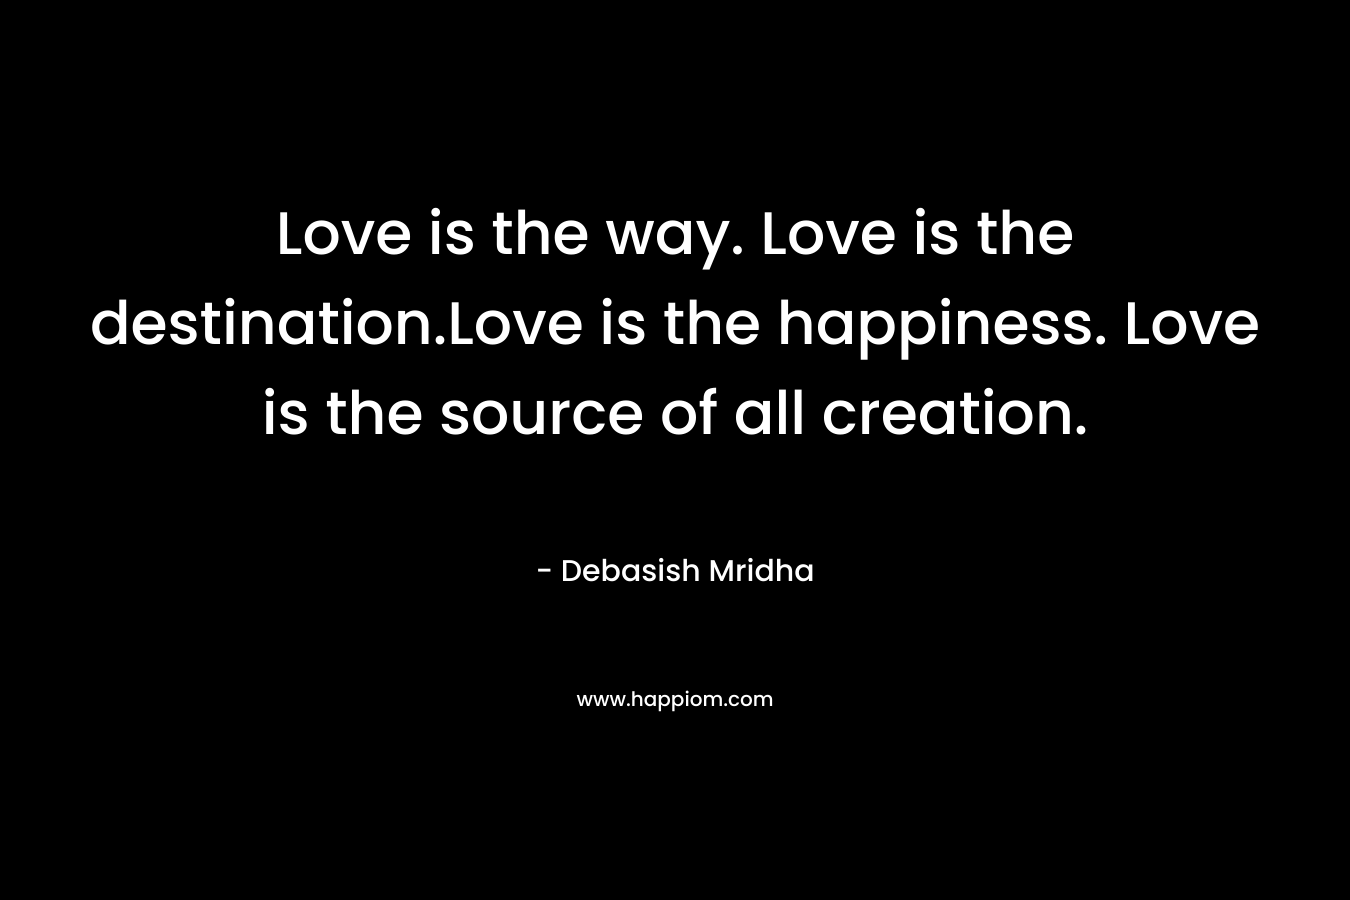 Love is the way. Love is the destination.Love is the happiness. Love is the source of all creation.